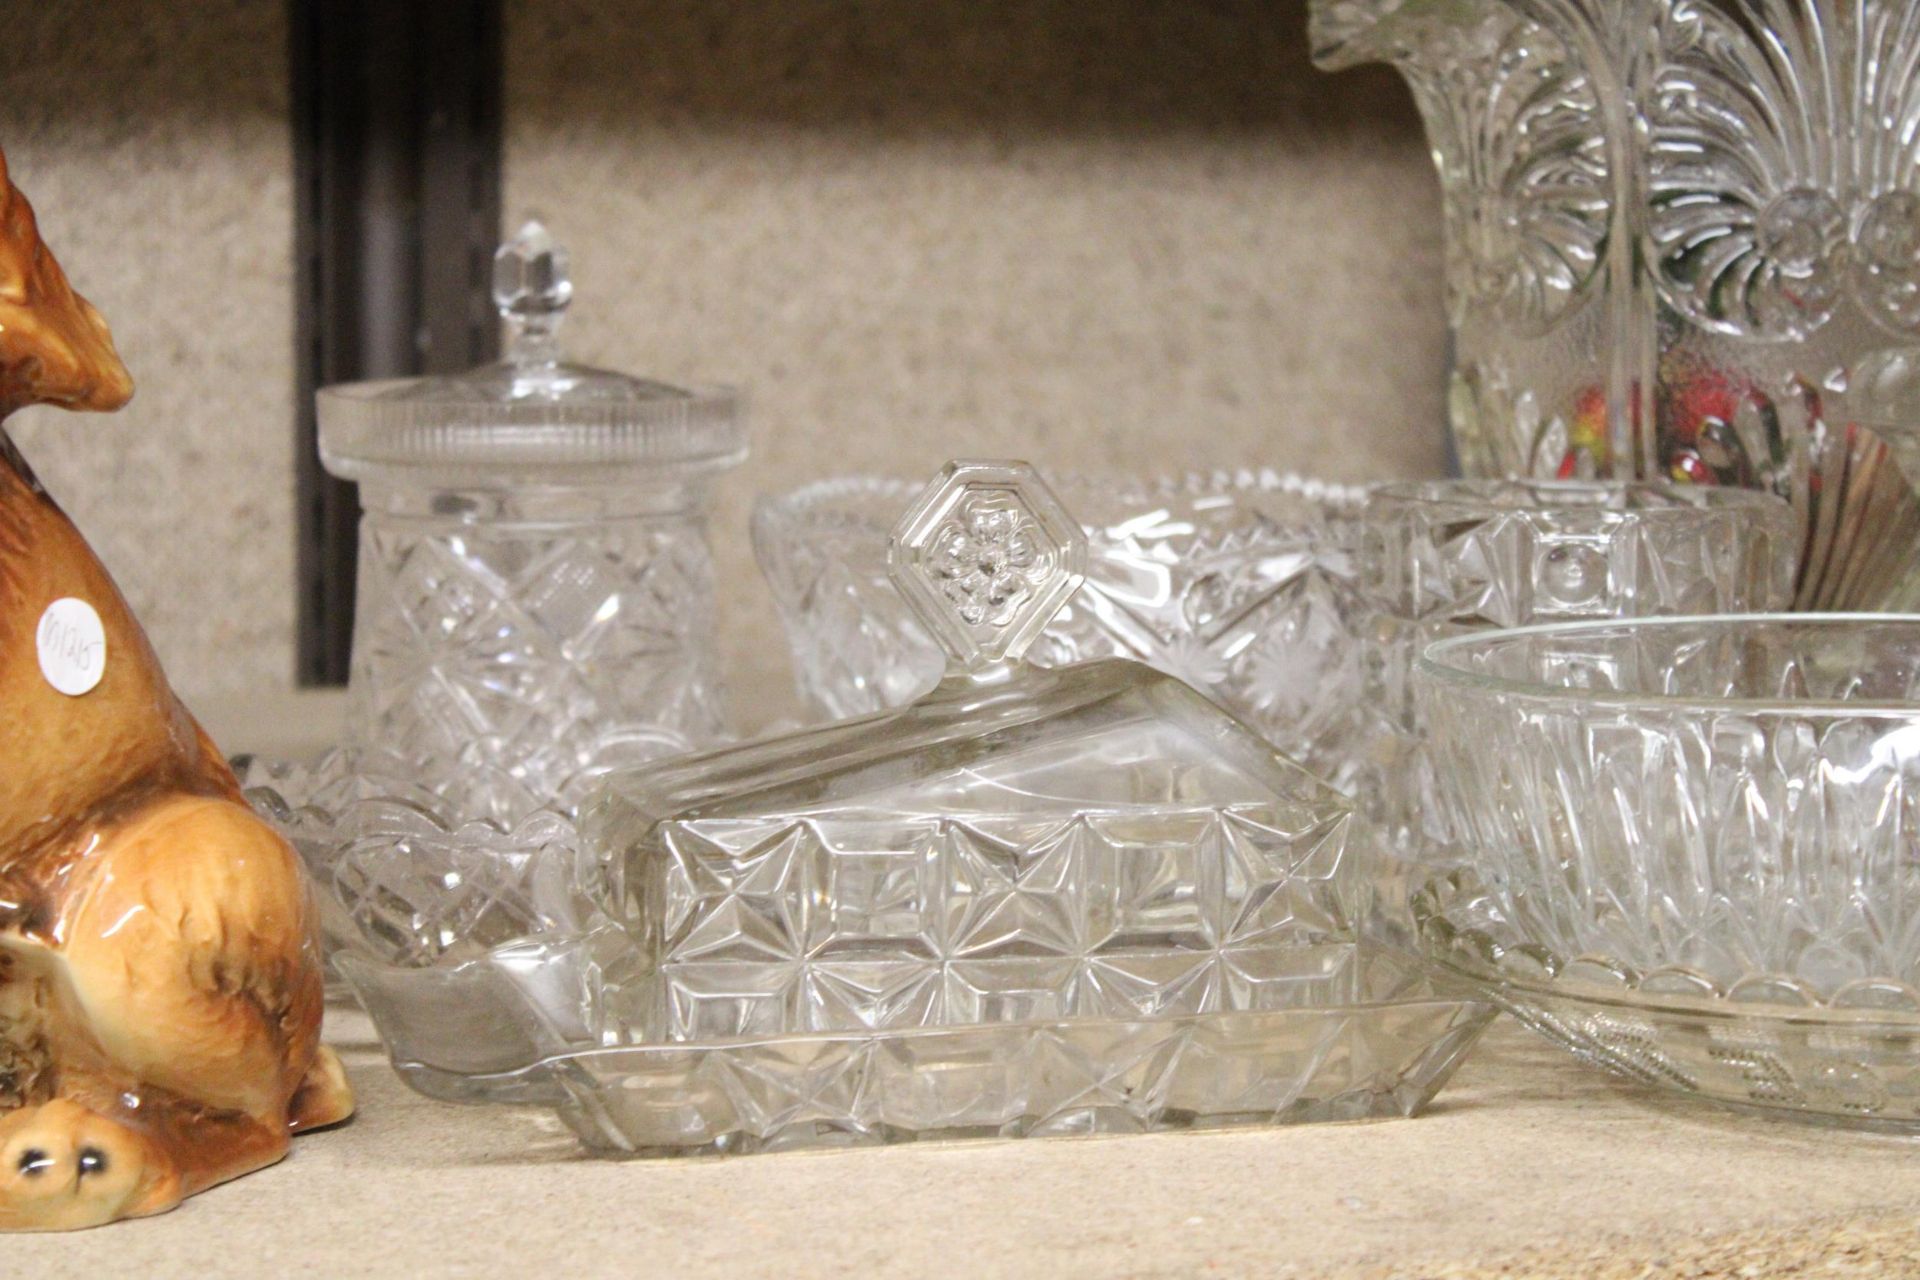 A QUANTITY OF GLASSWARE TO INCLUDE A LARGE VASE, BOWLS, FOOTED BOWLS, A CHEESE DISH, ETC - Image 4 of 4